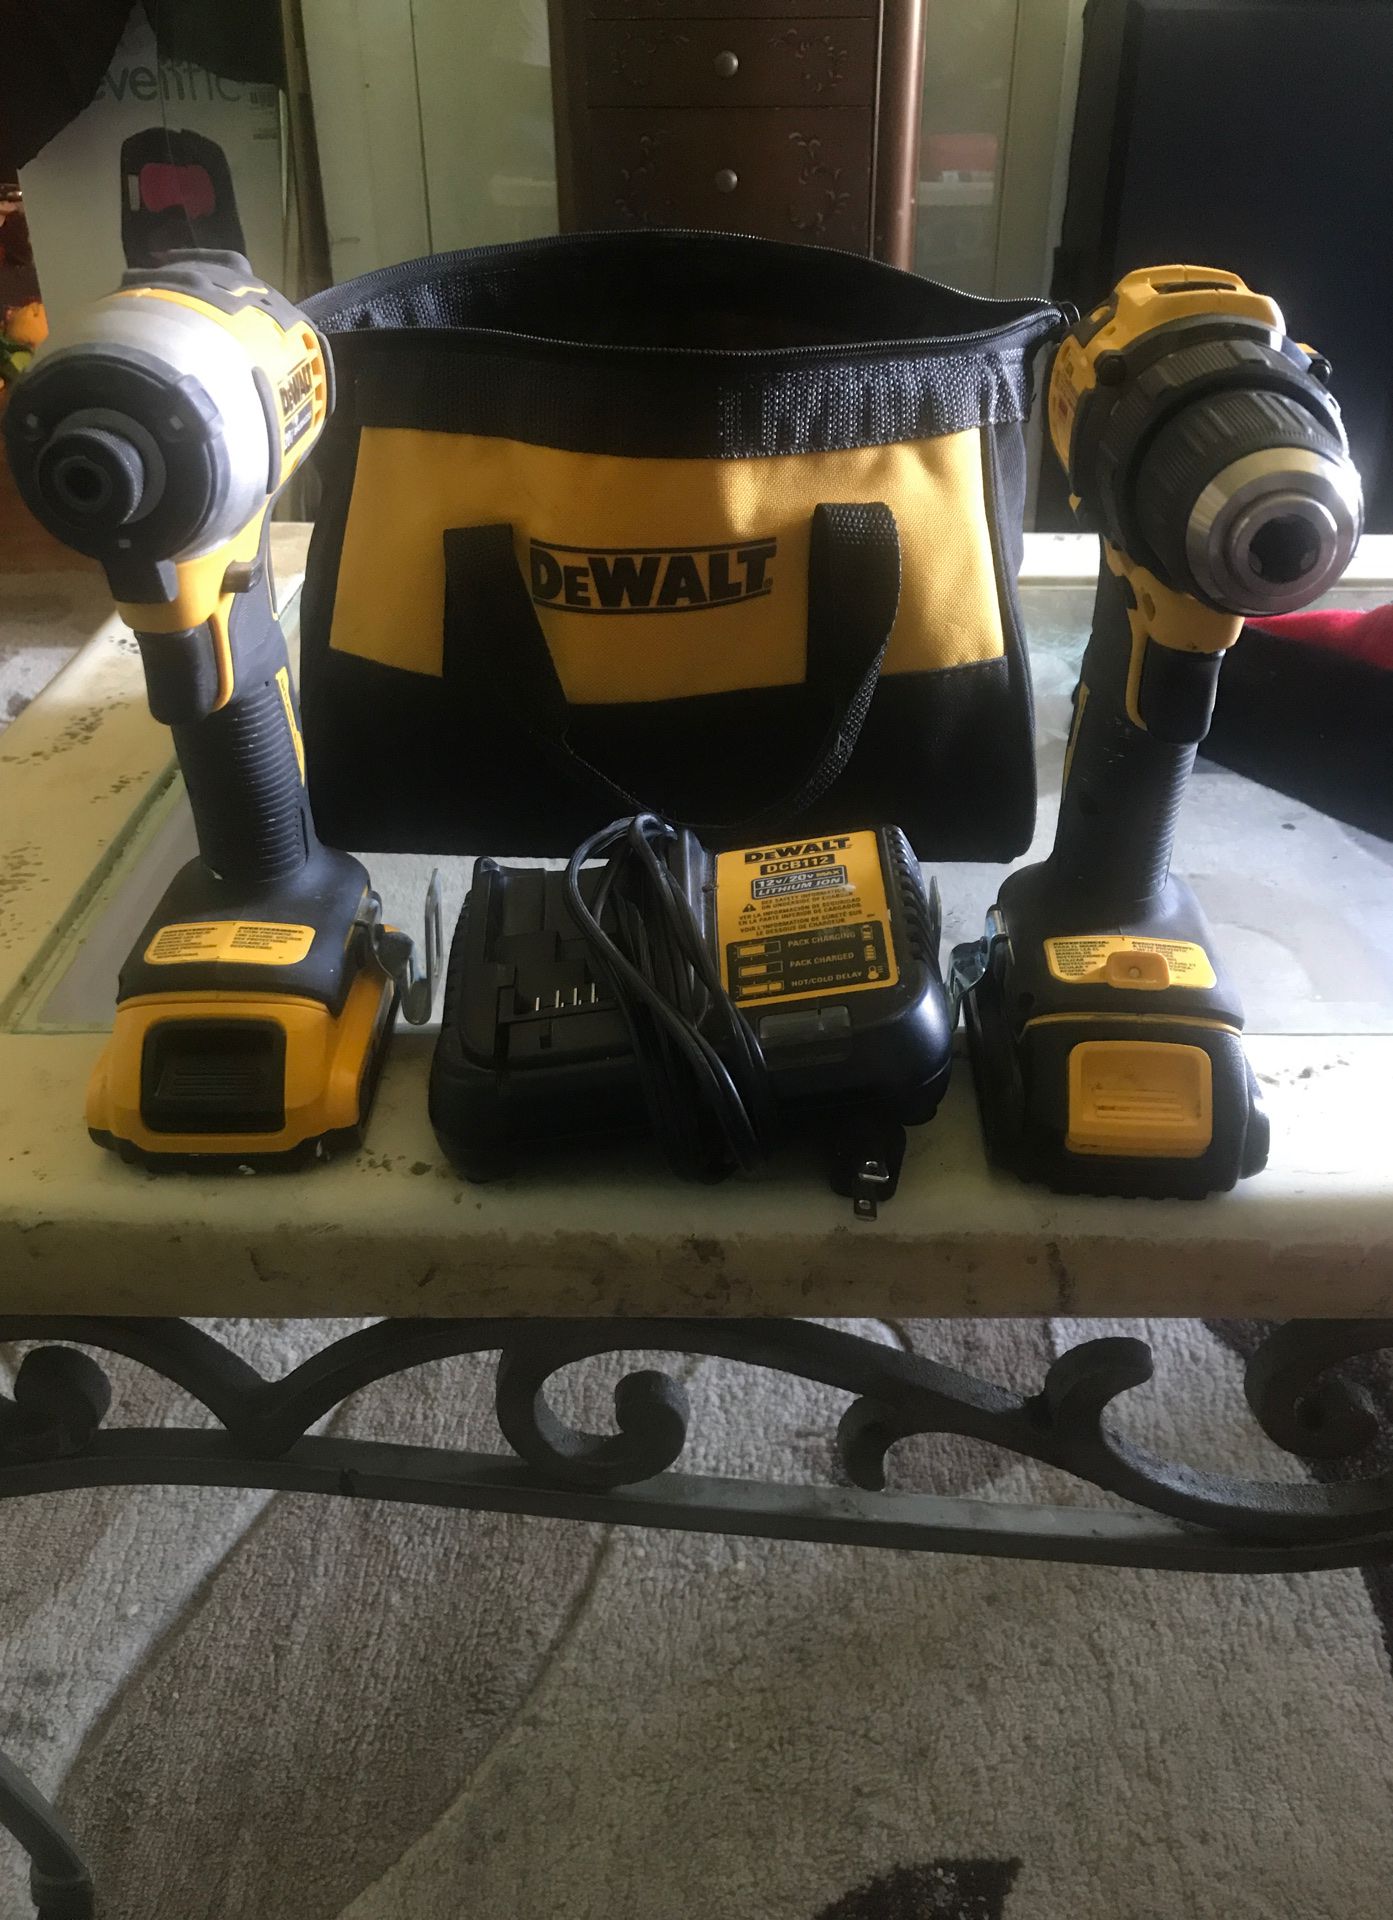 Dewalt 20v impact and driver drill with charger plus two batteries